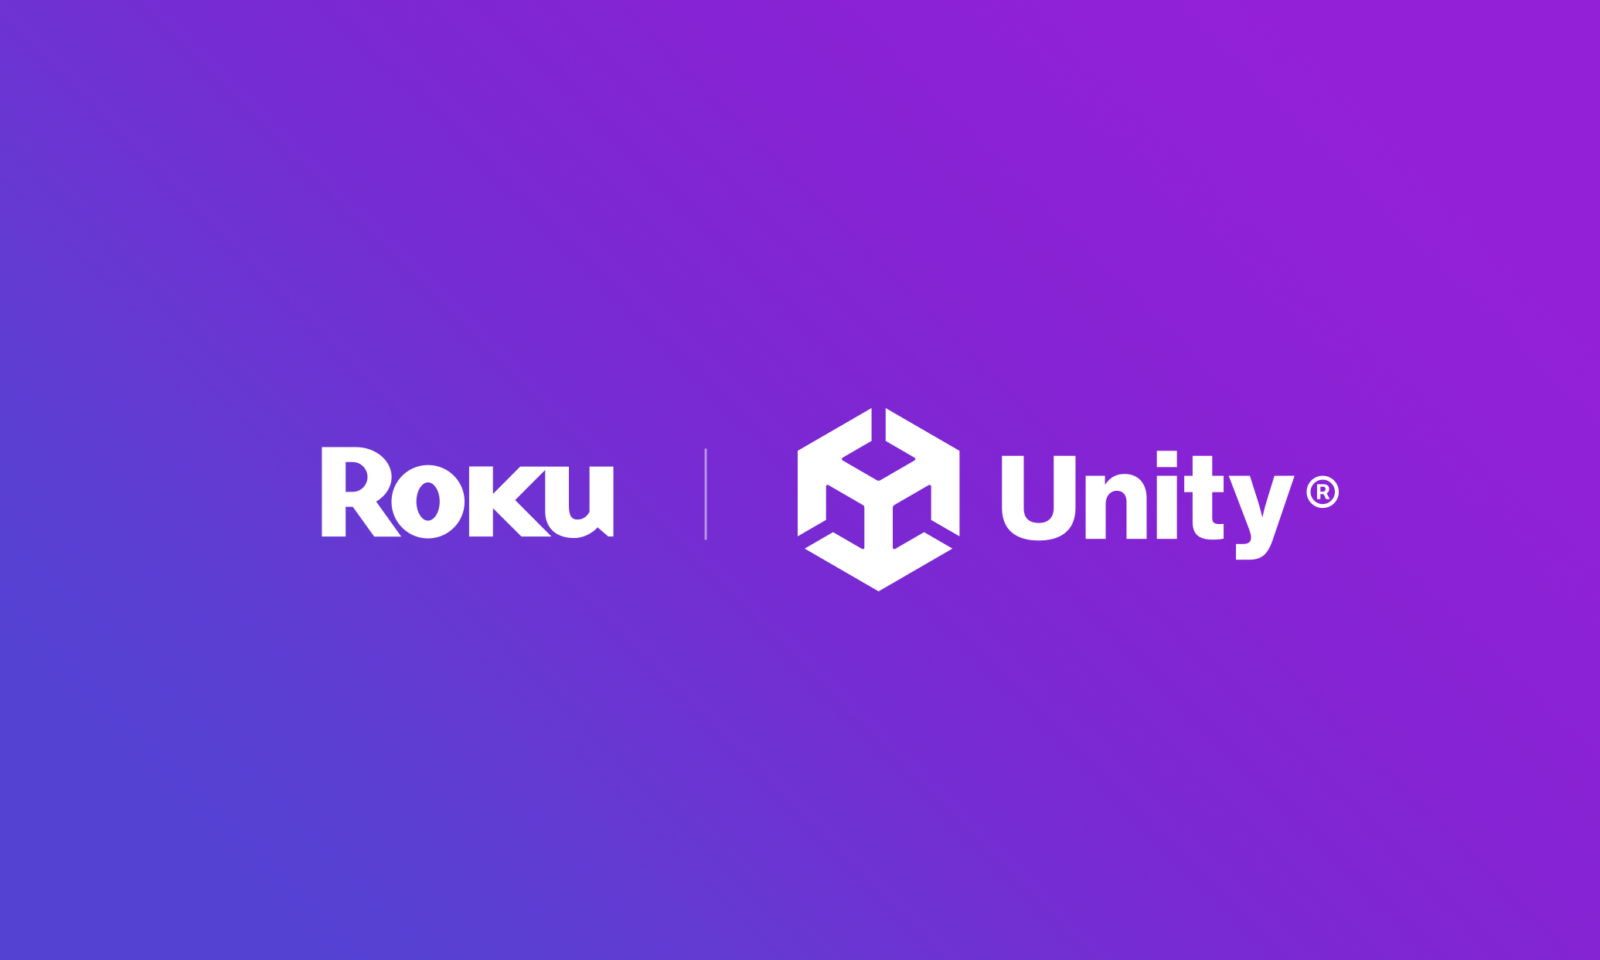 Roku, roku remote app, app marketers, roku advertising, acquisition campaigns, user acquisition, tv remote, tcl roku, unity remote, roku working, tv streaming, streaming services, app marketer, CTV, connected TV, roku express, roku action ads, unity, advertising, app, mobile app, ad formats, interactivity, performance marketing, video, ad measurement, streaming video, mobile game, streaming service, streaming platform, real-time, 3D, RT3D, partnership, app install, app campaign, CTR, click through rate, groupM, optimization, Luna, app marketing, app download, performance boost, marketing channels, cross-channel advertising, campaign technology,